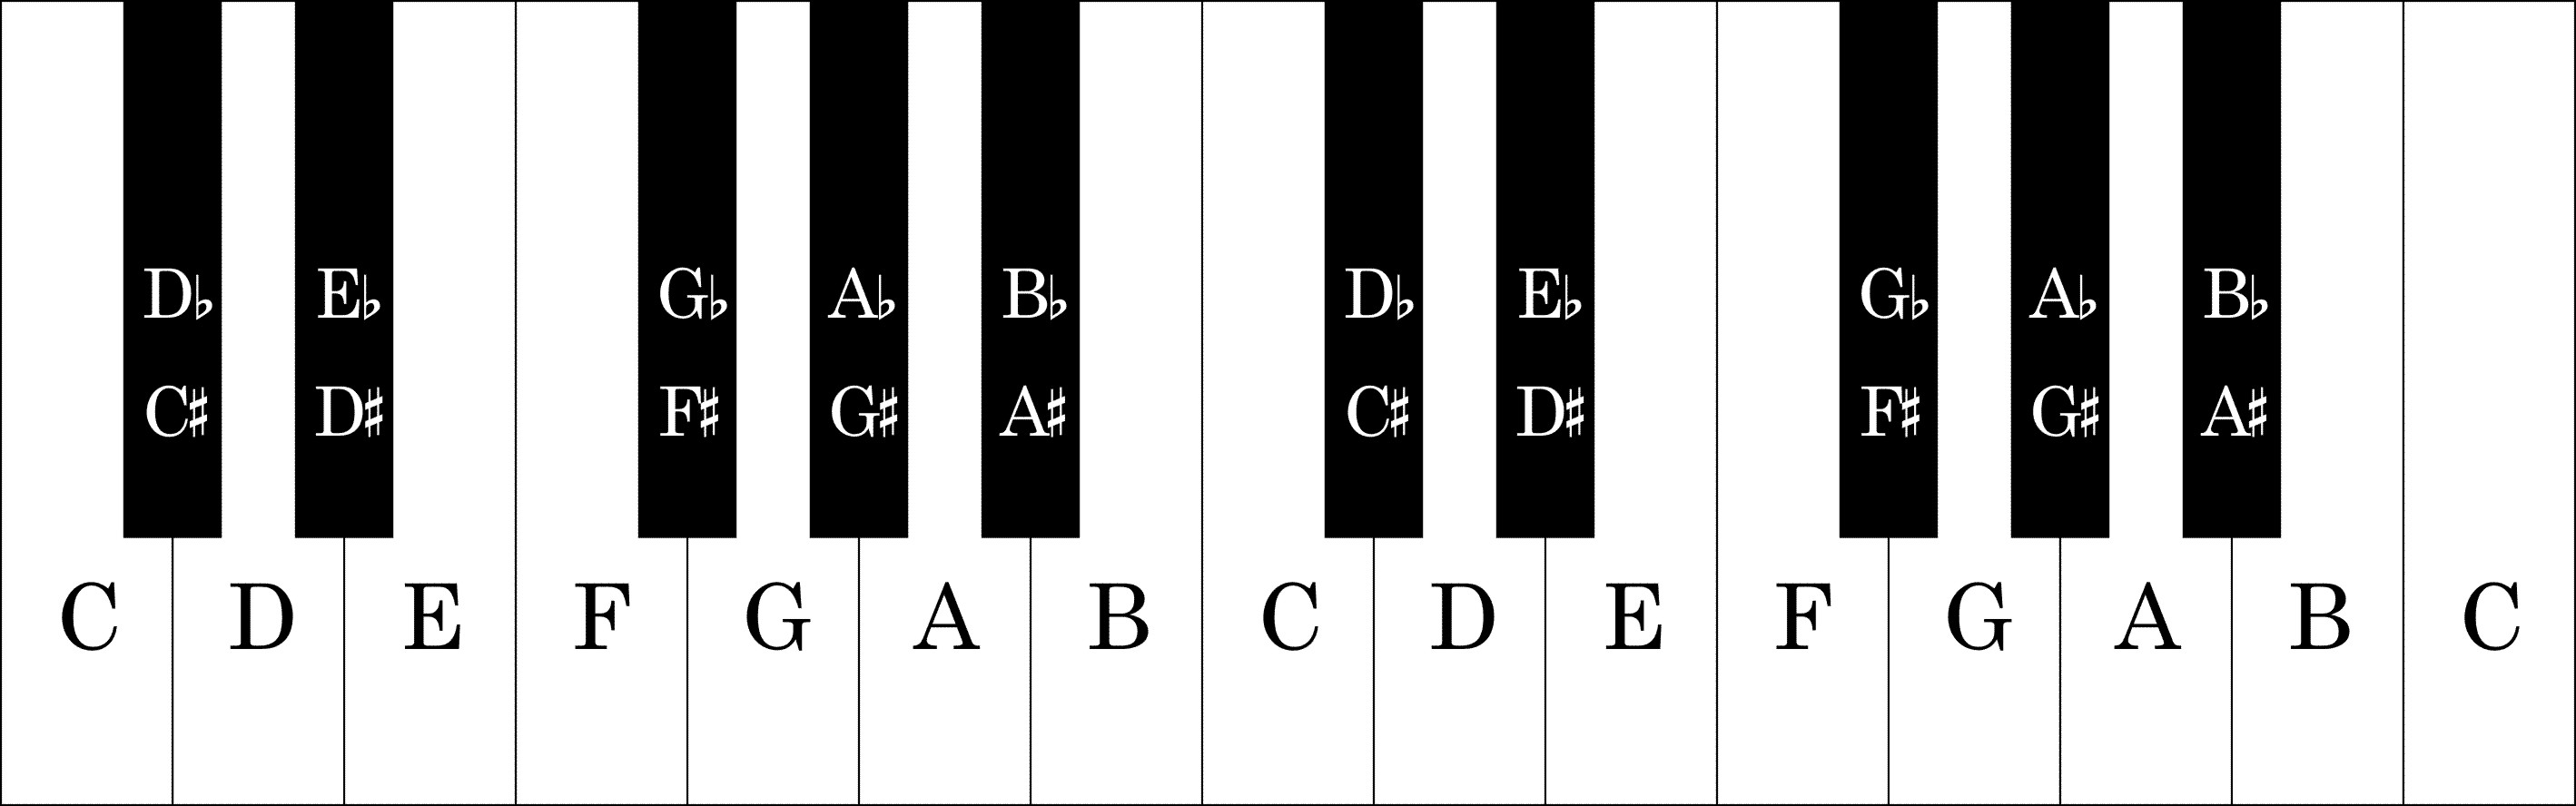 Results for Picture Of Piano Keyboard With Notes | imagebasket.net